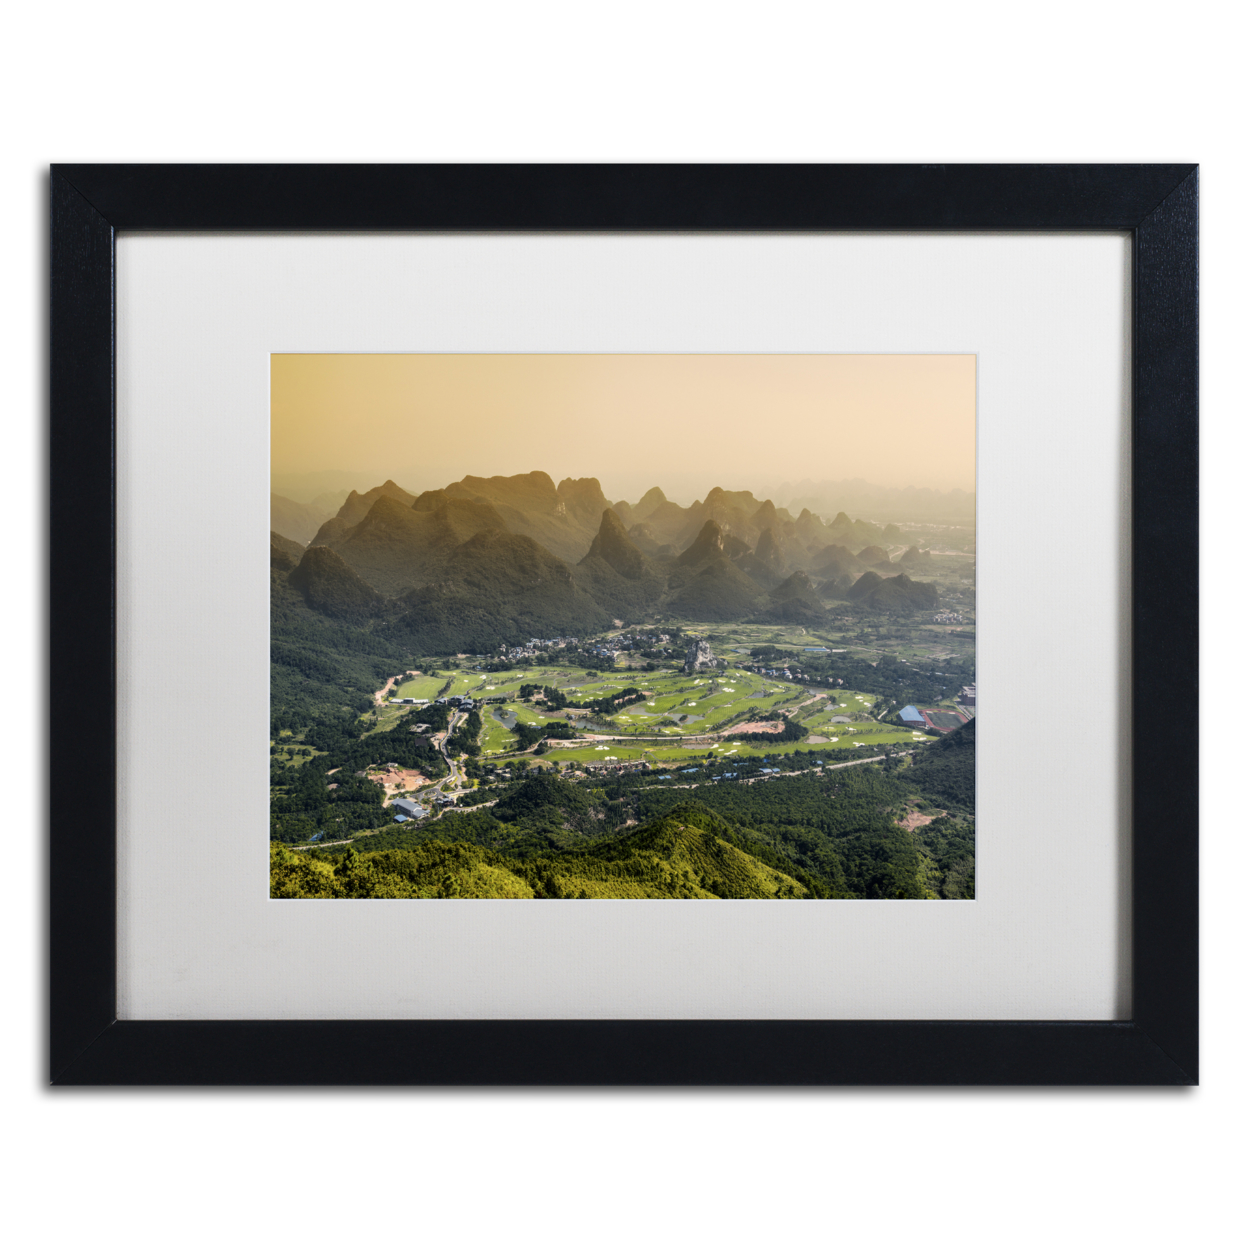 Philippe Hugonnard 'Guilin' Black Wooden Framed Art 18 X 22 Inches